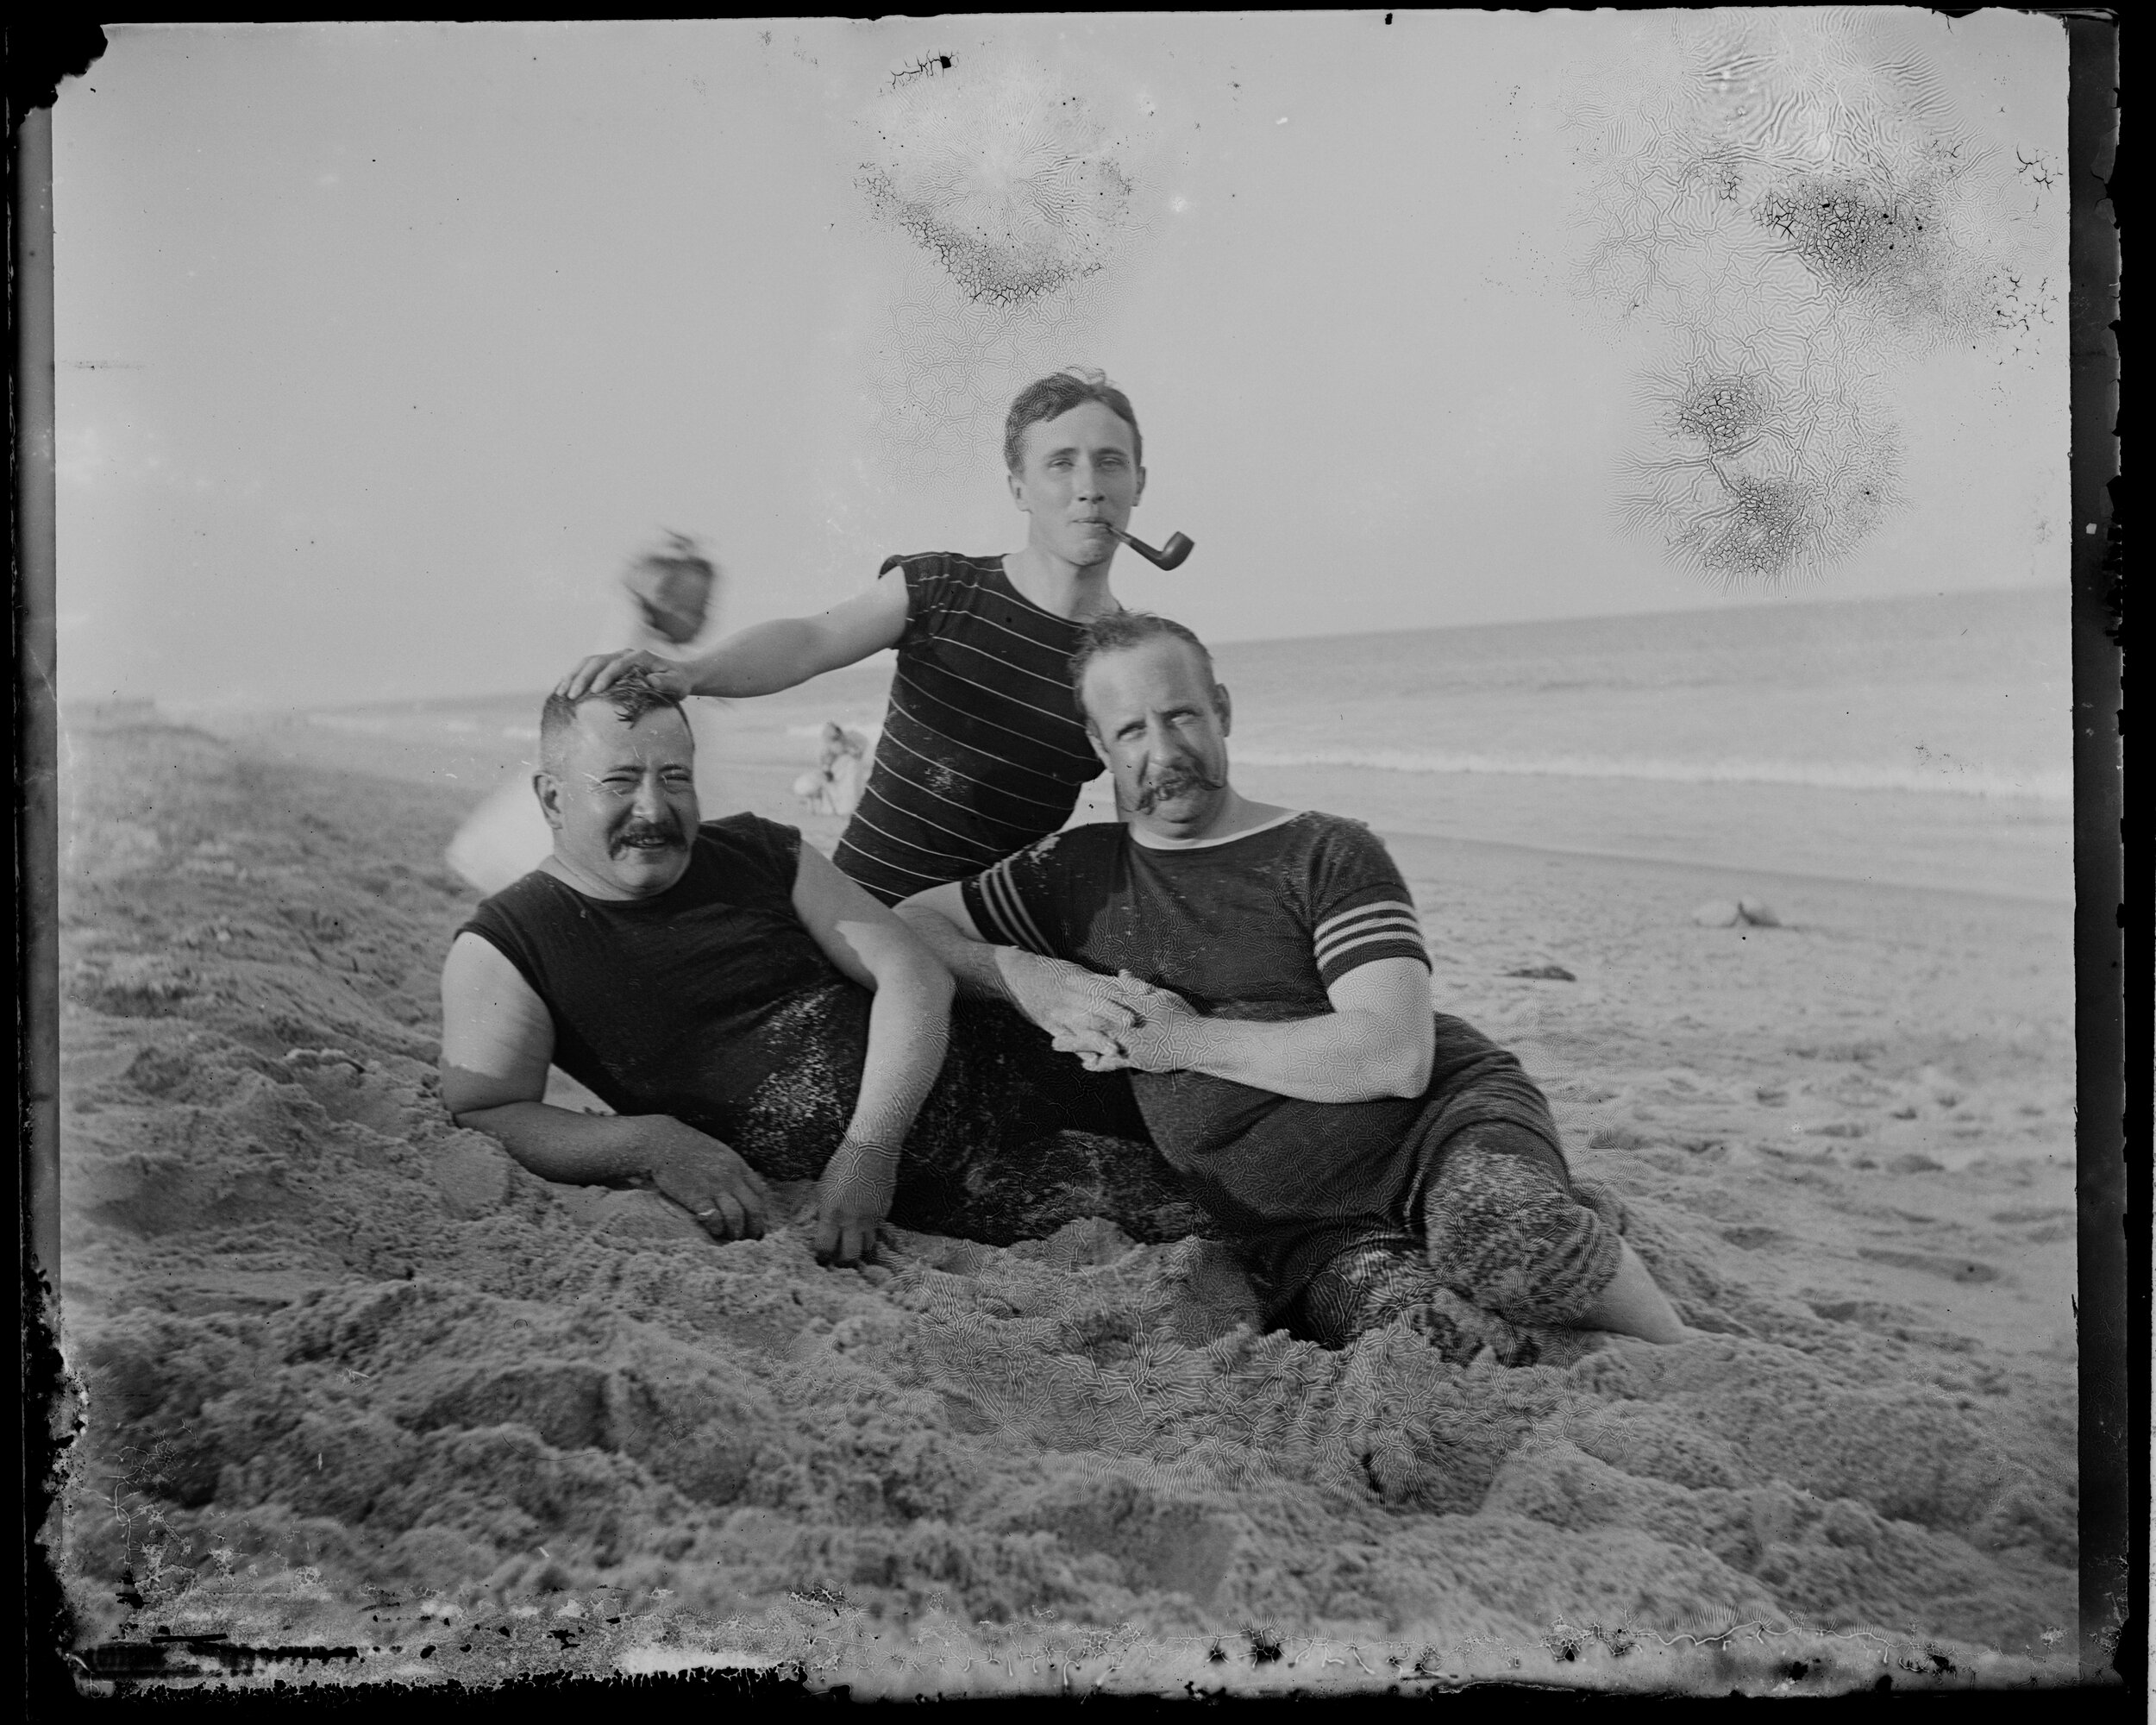  Peter Austen (right) and friends on the beach at Bay Head, New Jersey. Photo by Alice Austen, August 25, 1895. Peter Austen was the uncle of Staten Island photographer Alice Austen. 